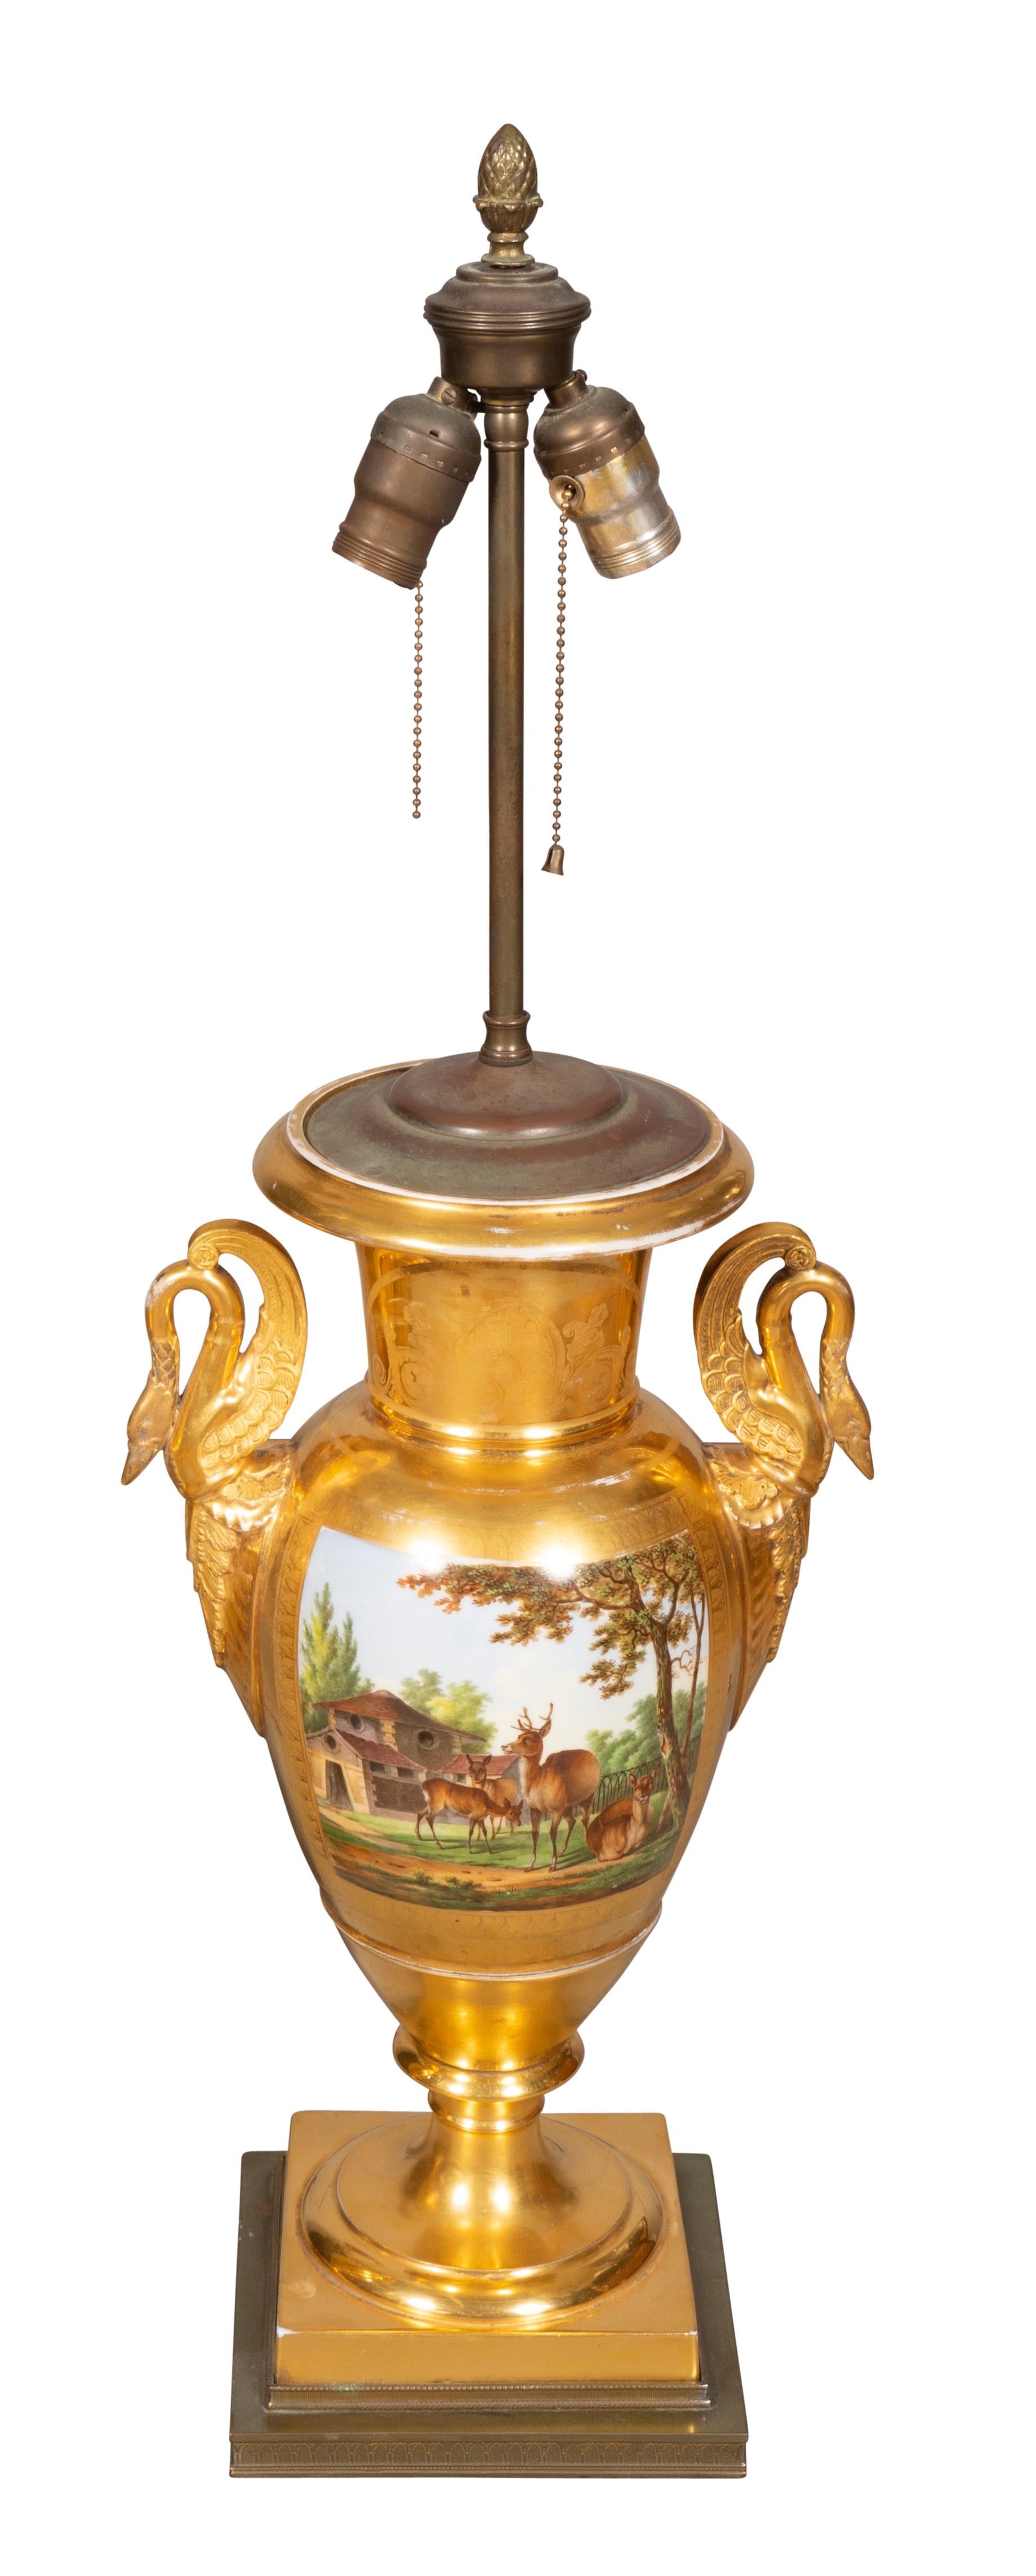 Old vieux Paris porcelain from the Napoleonic period decorated with farm animals and barn. With swan handles. Beautifully painted and fire gilded. Now mounted as lamps.